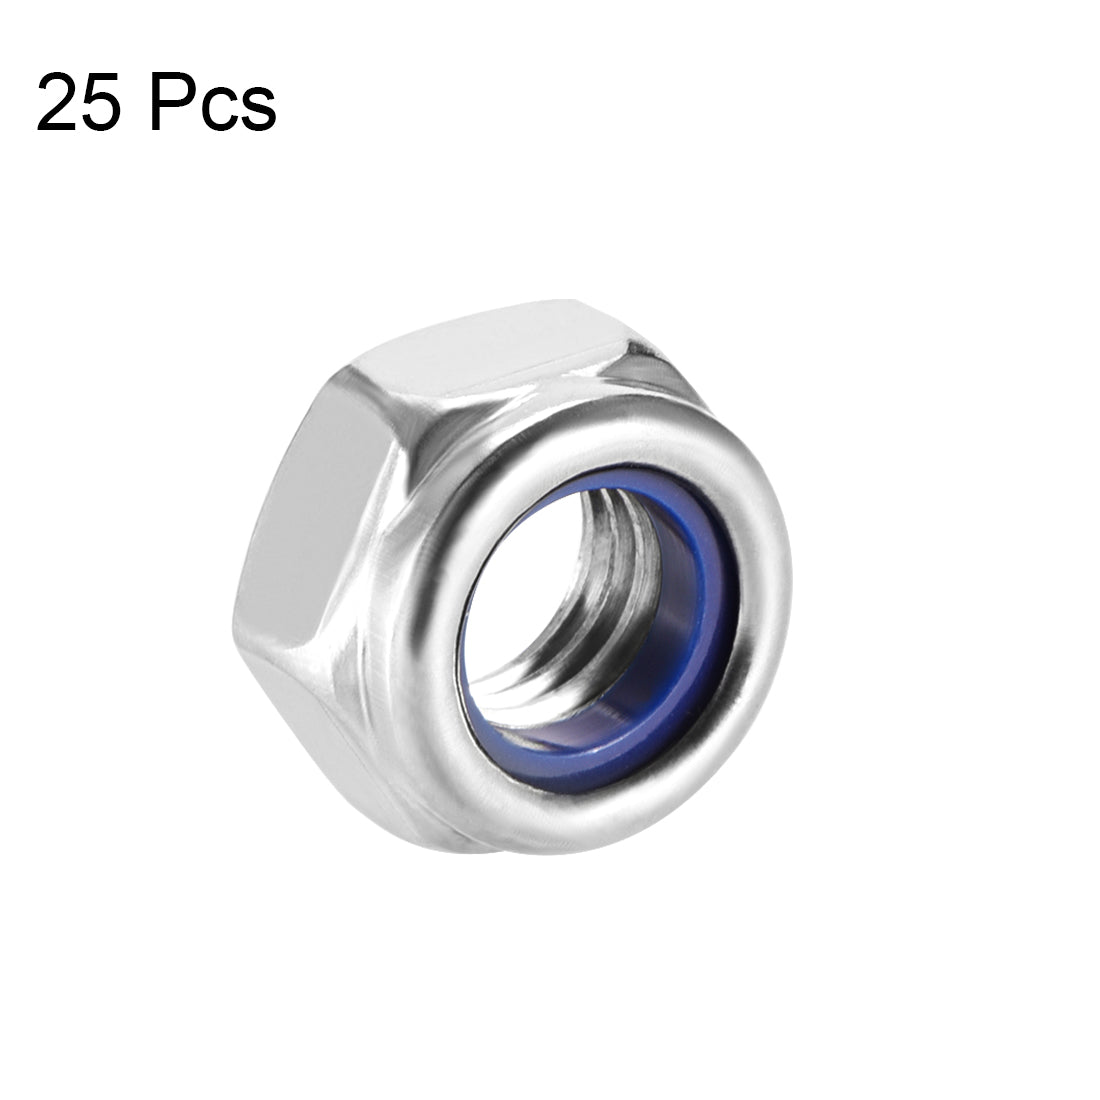 uxcell Uxcell M8x1.25mm Hex Lock Nuts Stainless Steel Nylon Insert Self-Lock Nut, 25Pcs Silver